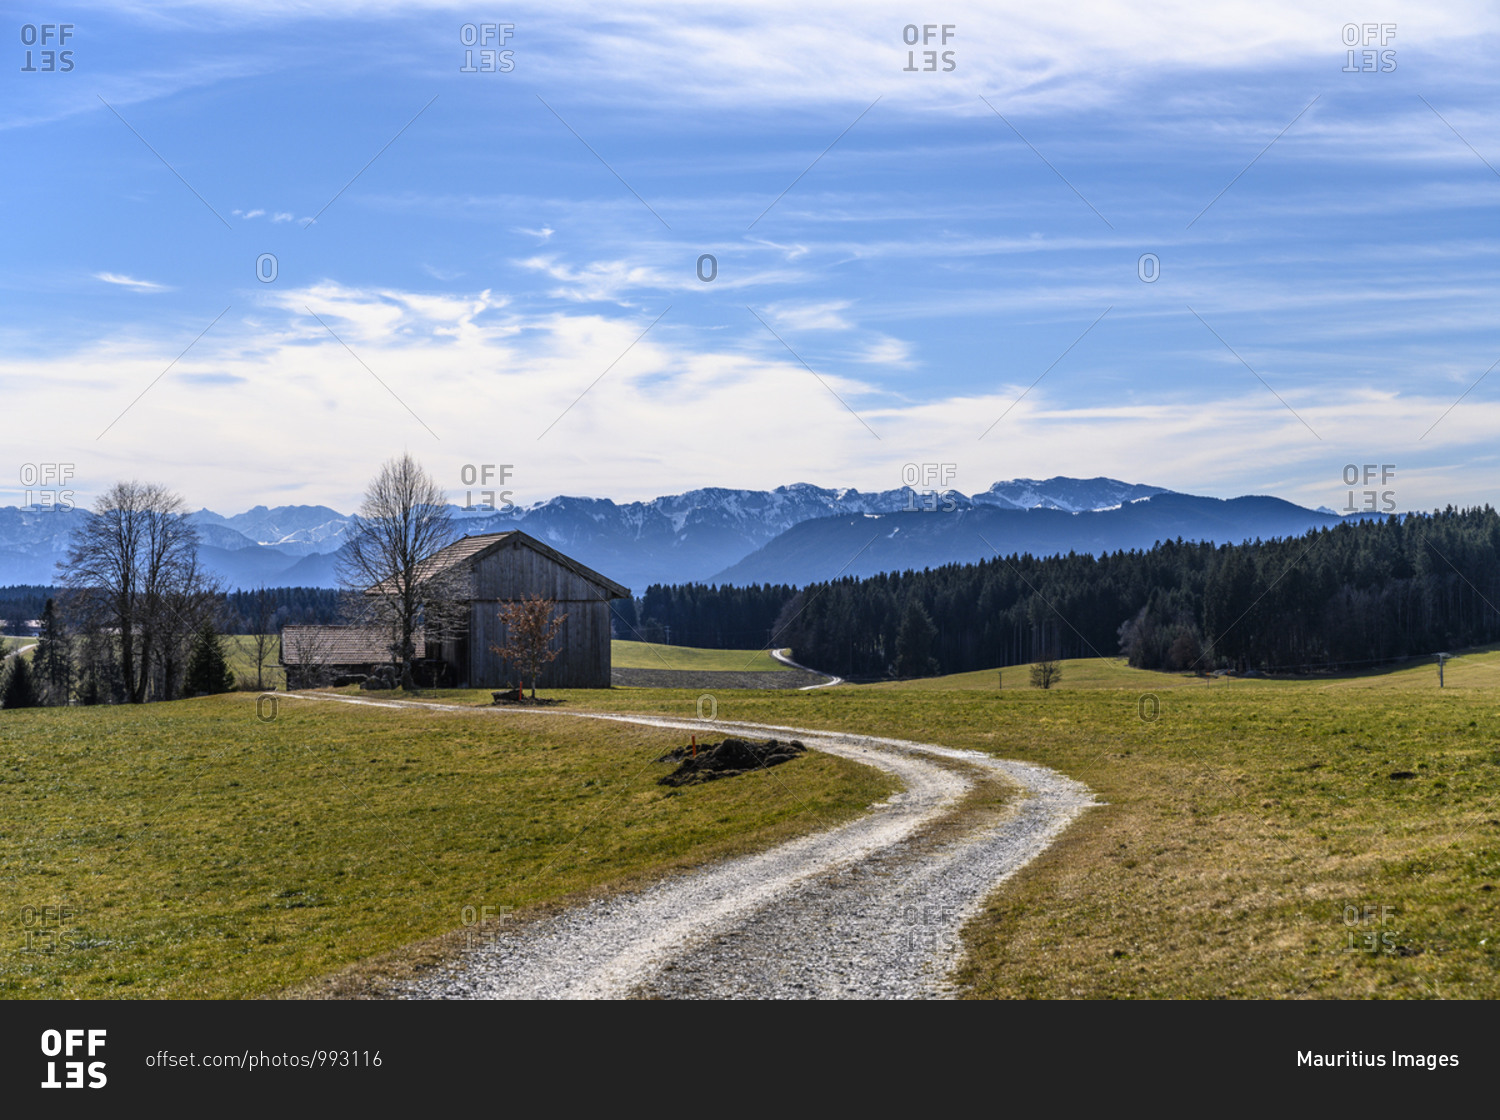 Germany, Bavaria, Upper Bavaria, Tolzer Land, Dietramszell, Humbach district, view of pre-Alps